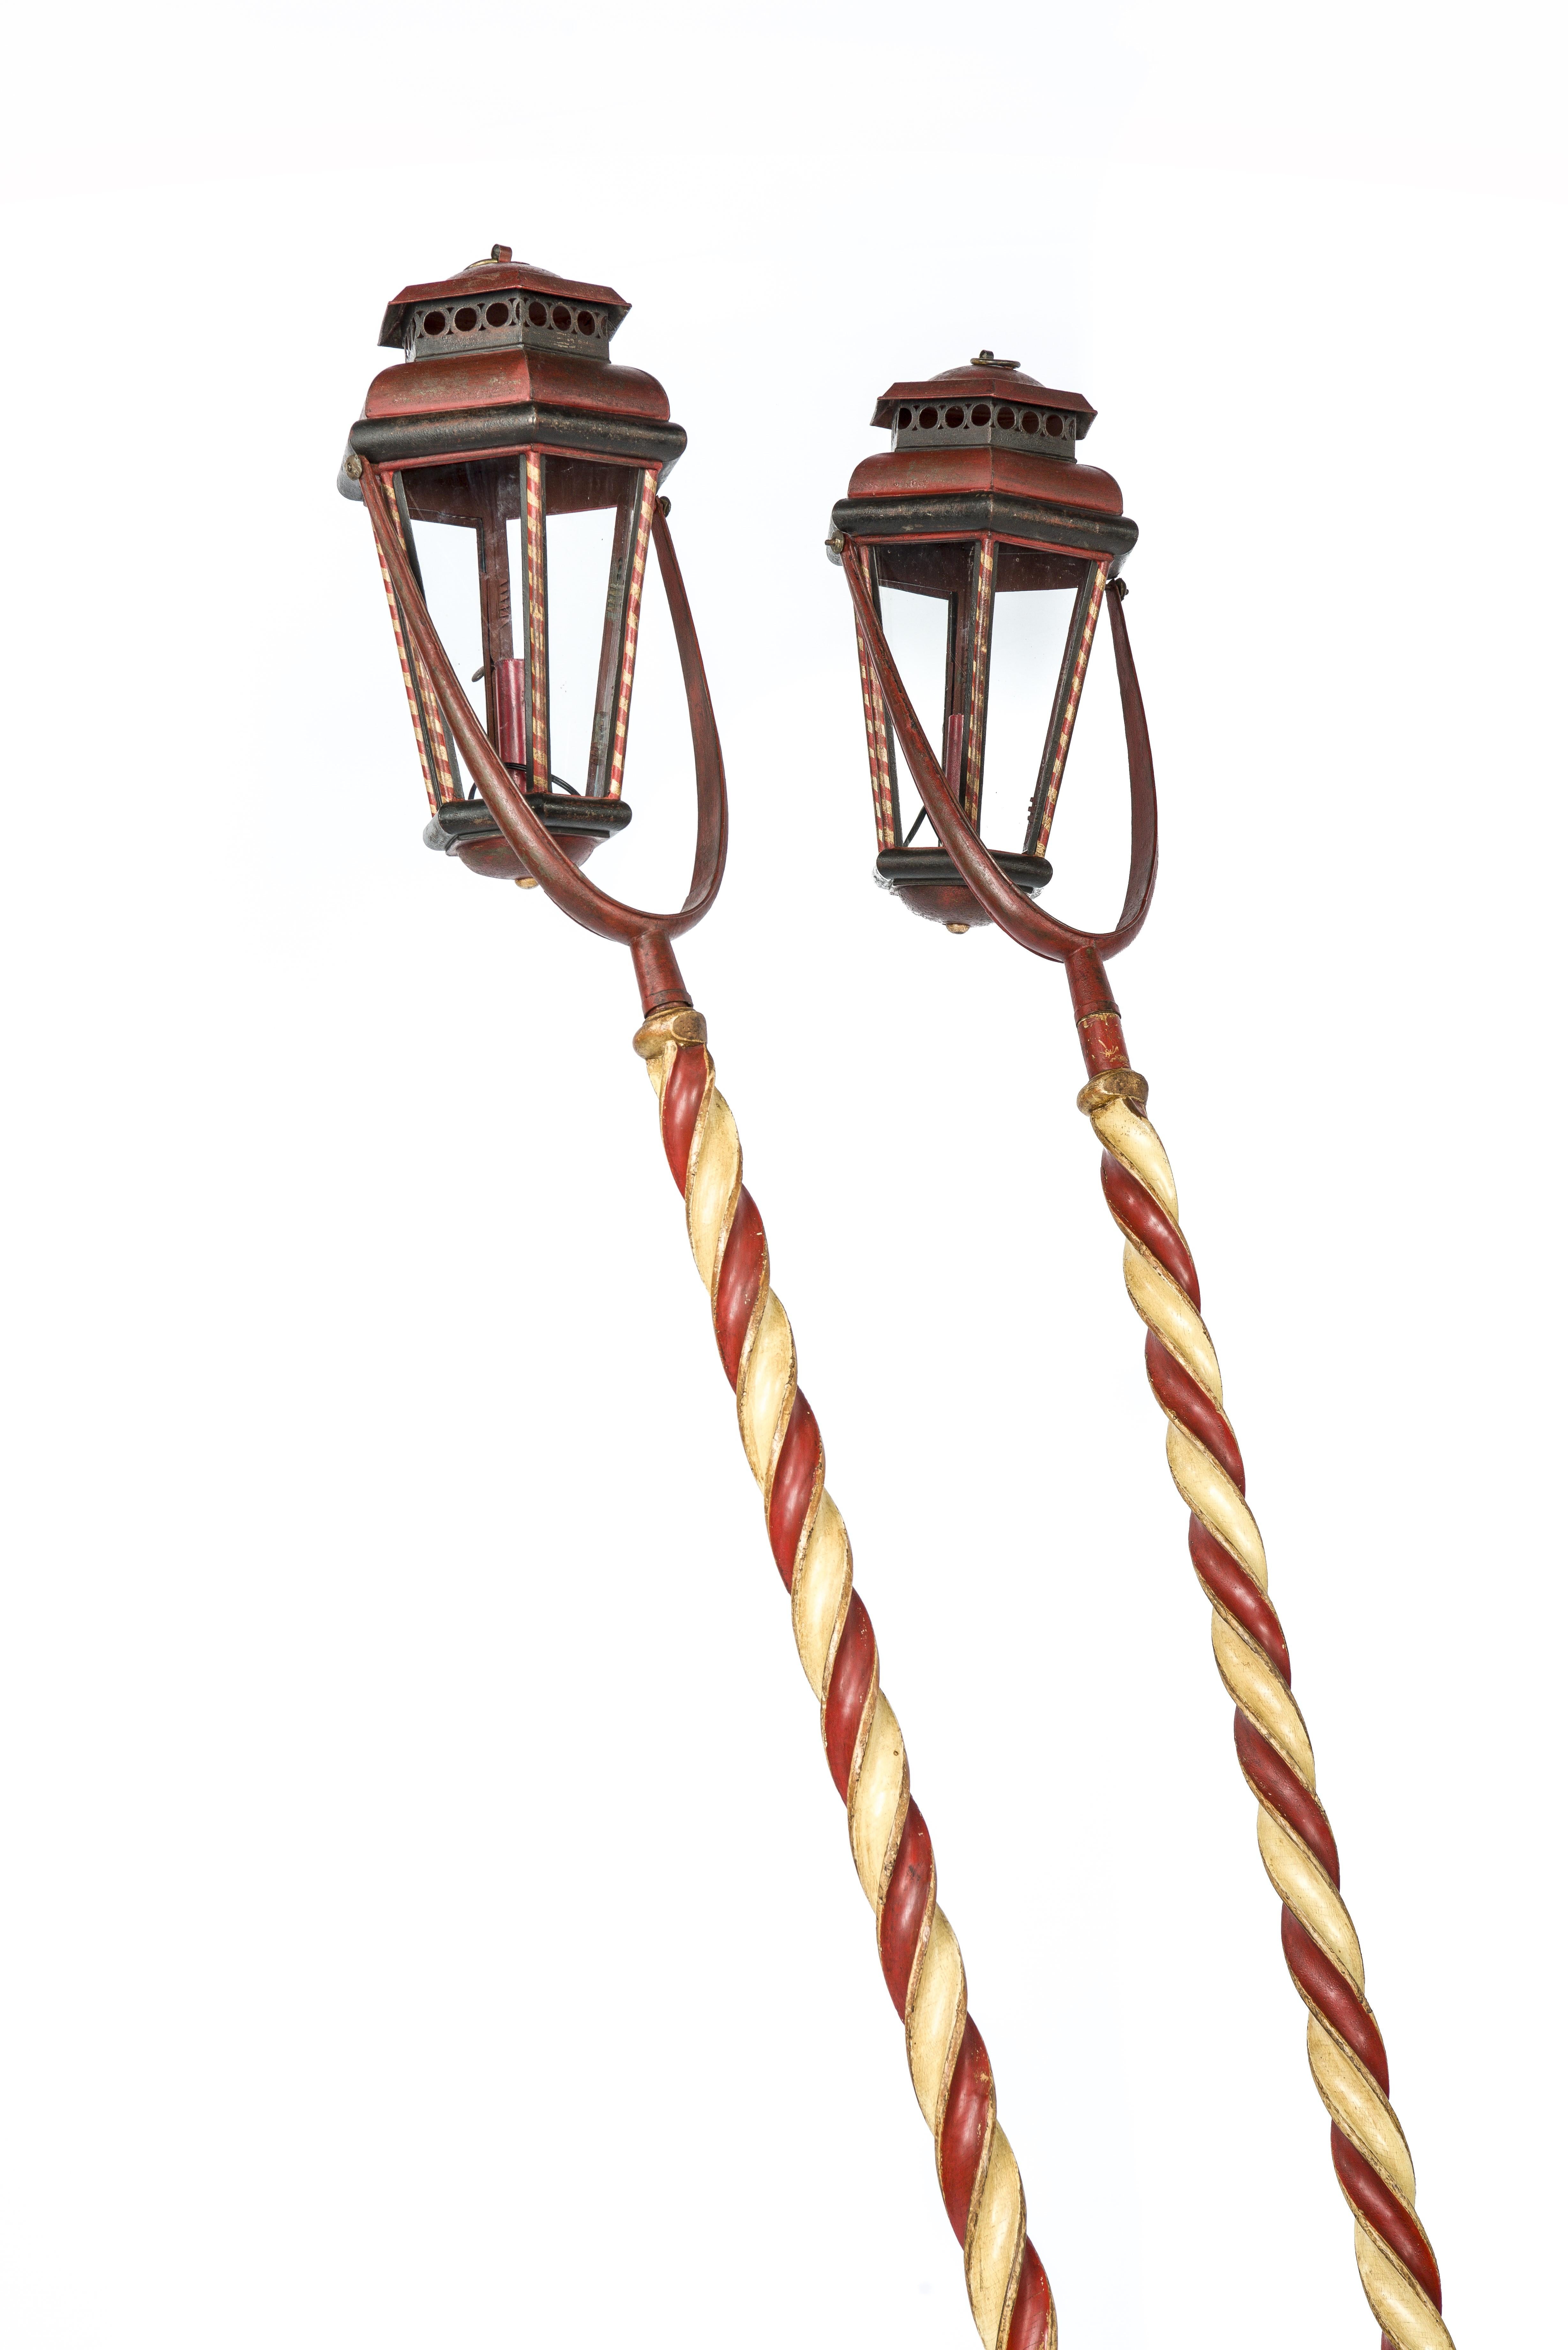 A beautiful pair of Italian or Venetian gondola lanterns with hexagonal metal surrounds were made circa 1850. The lanterns are suspended on swinging metal support in red white and black paint, mounted on red and white barley twisted posts. Dates to